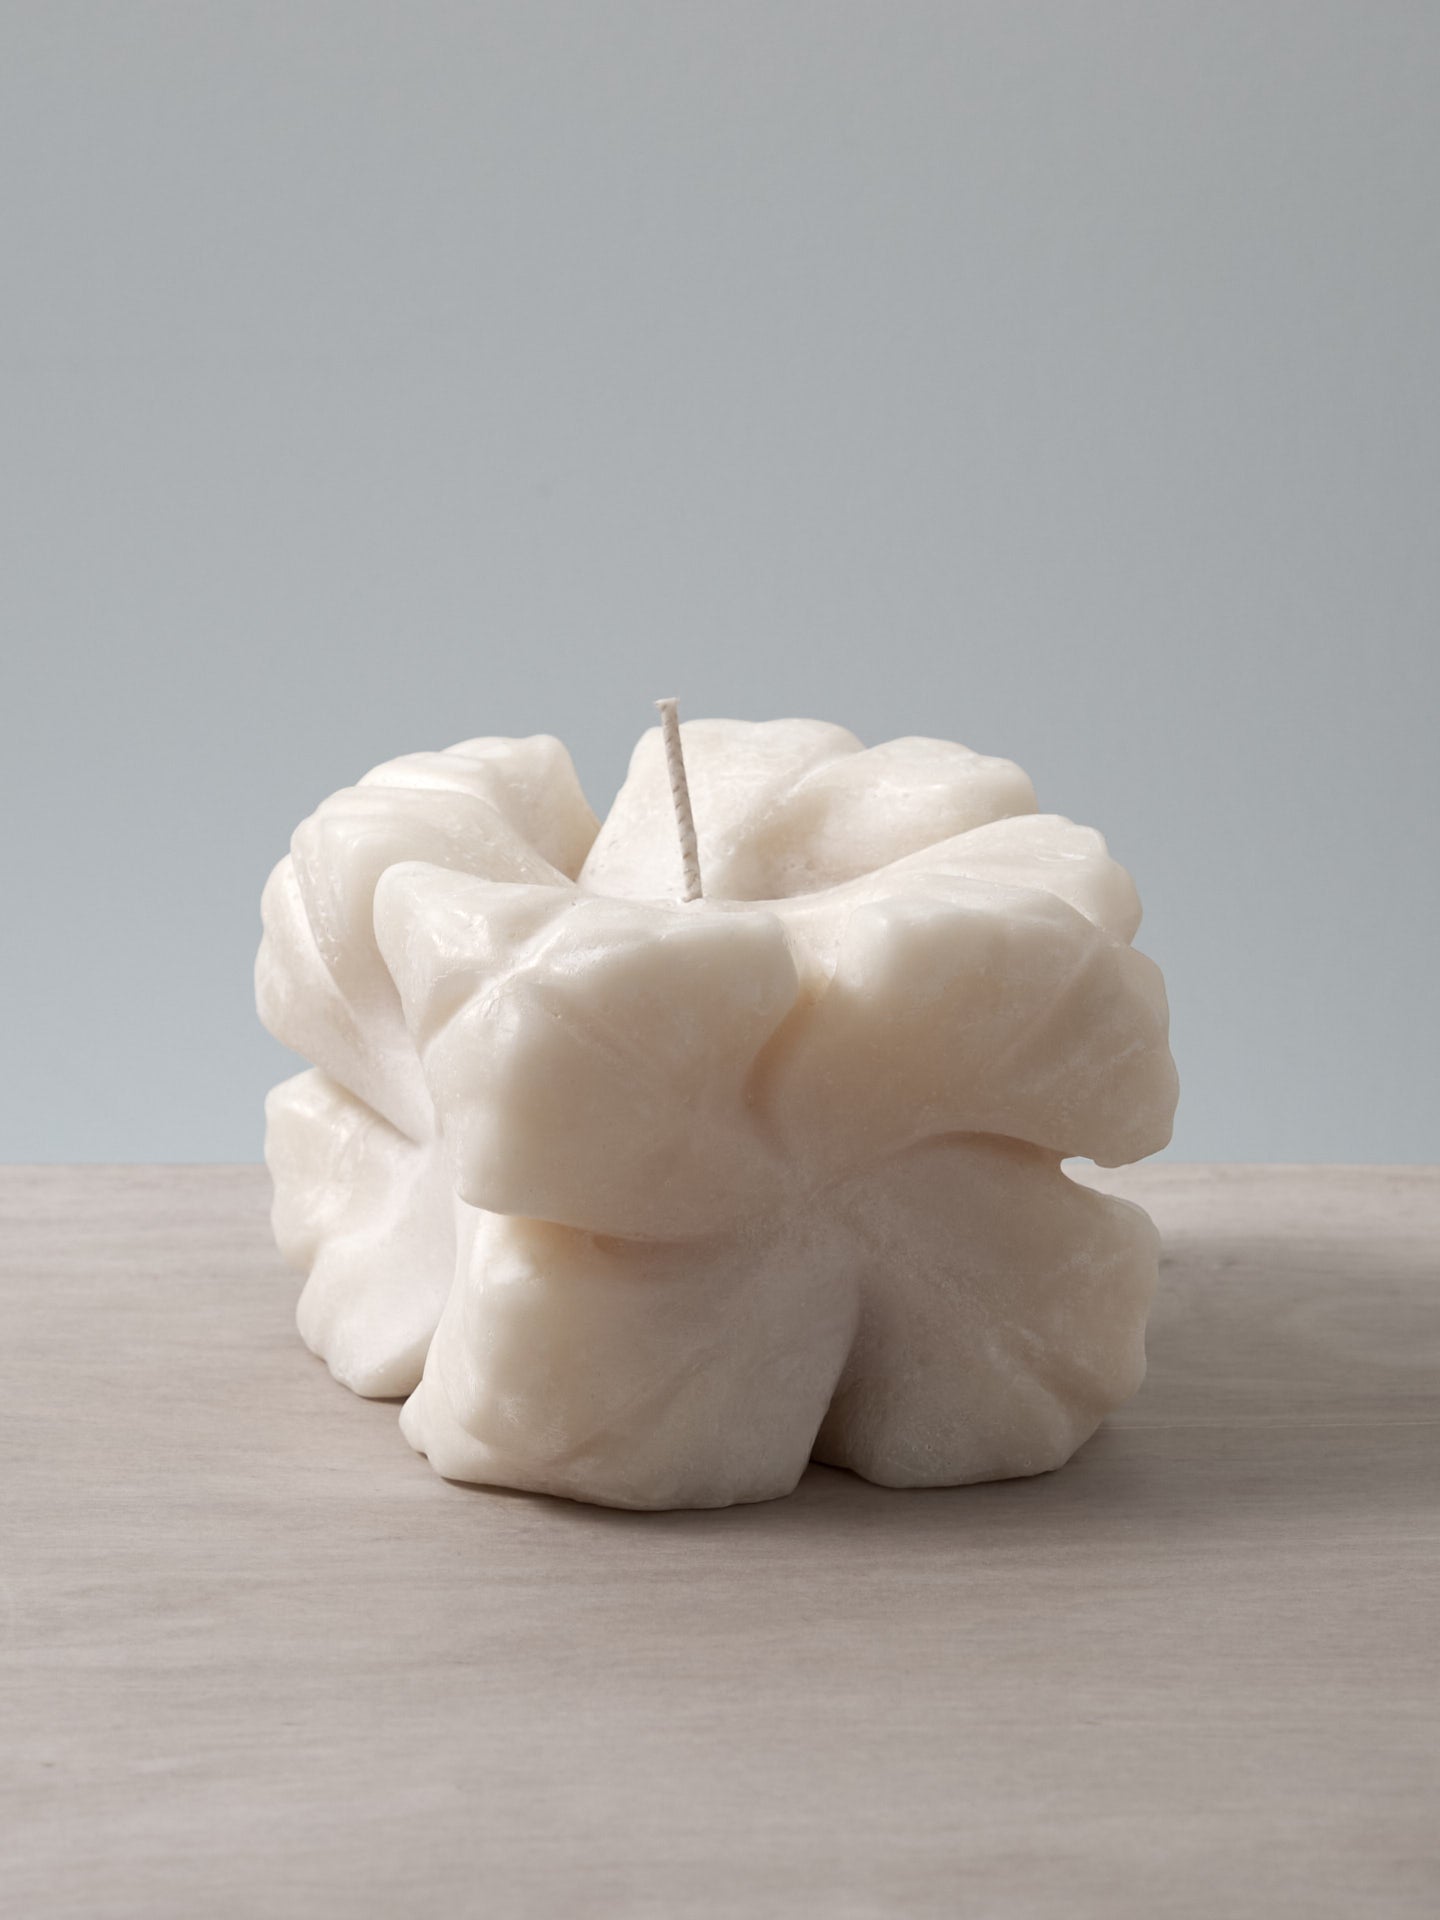 An Andrej Urem Rose Candle sitting on top of a table.